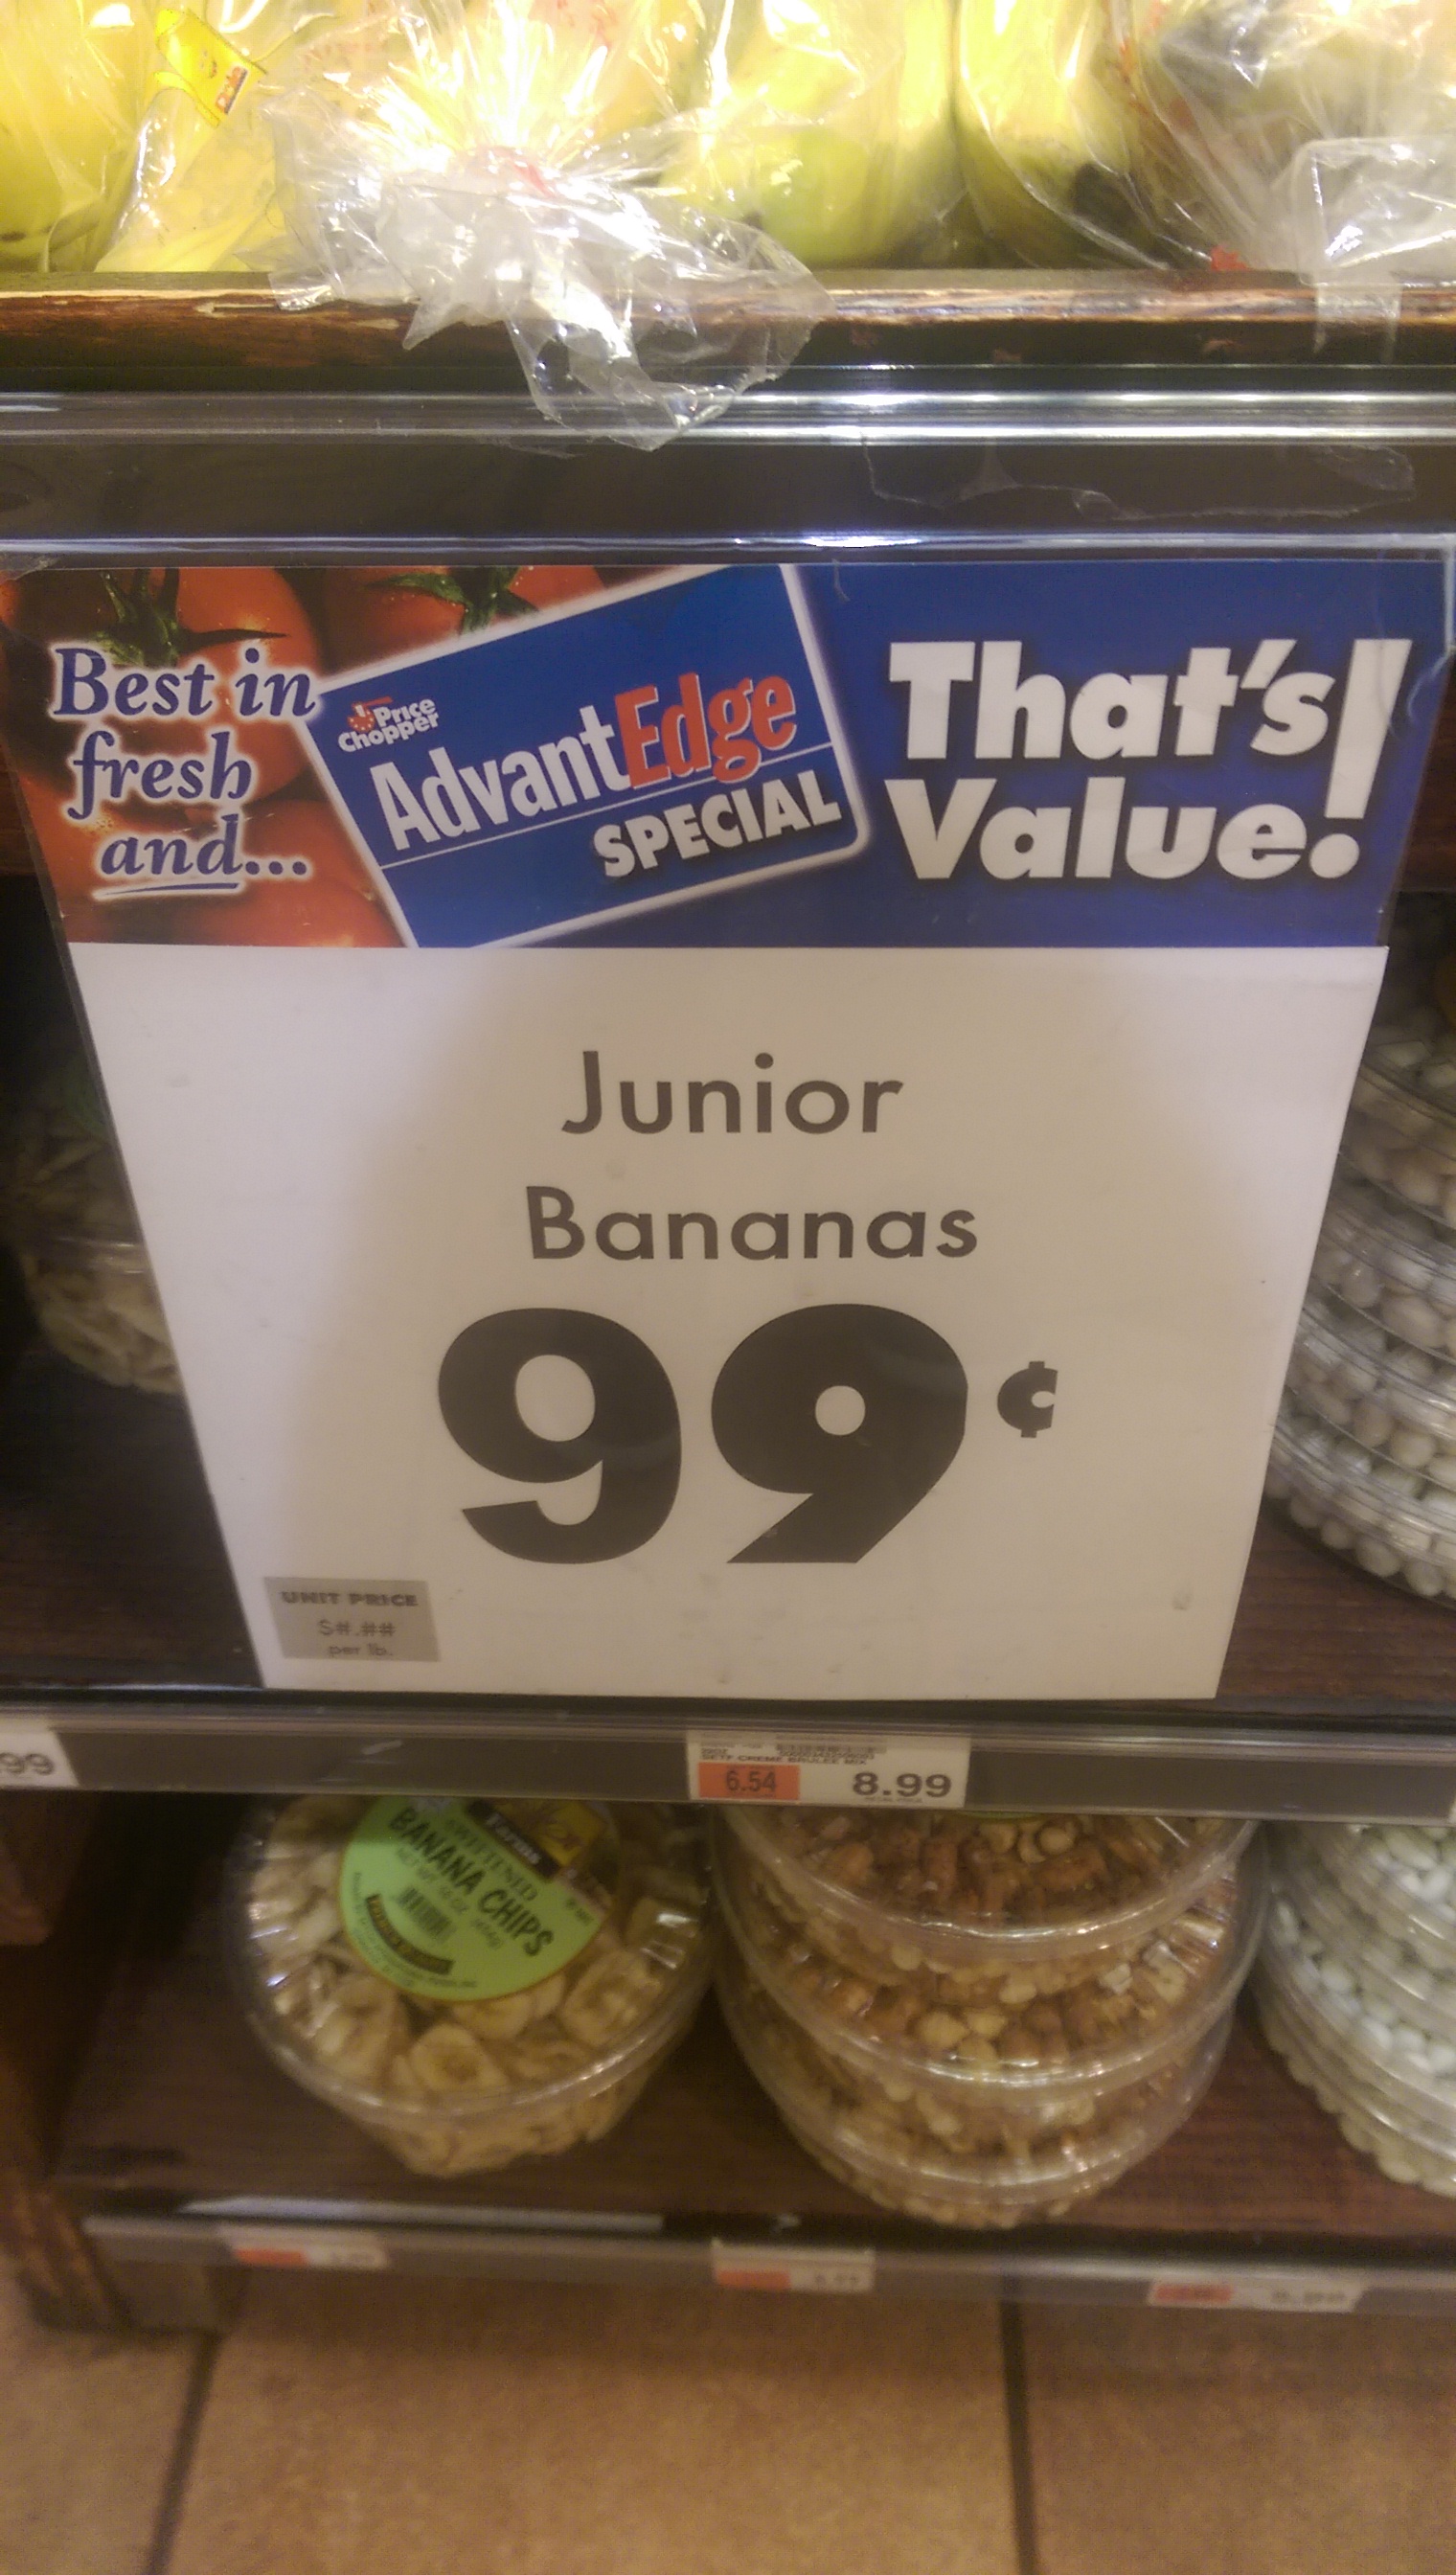 ocd Perfectionism - Best in intele That's fresh and how AdvanPECIAL Value. Junior Bananas 99